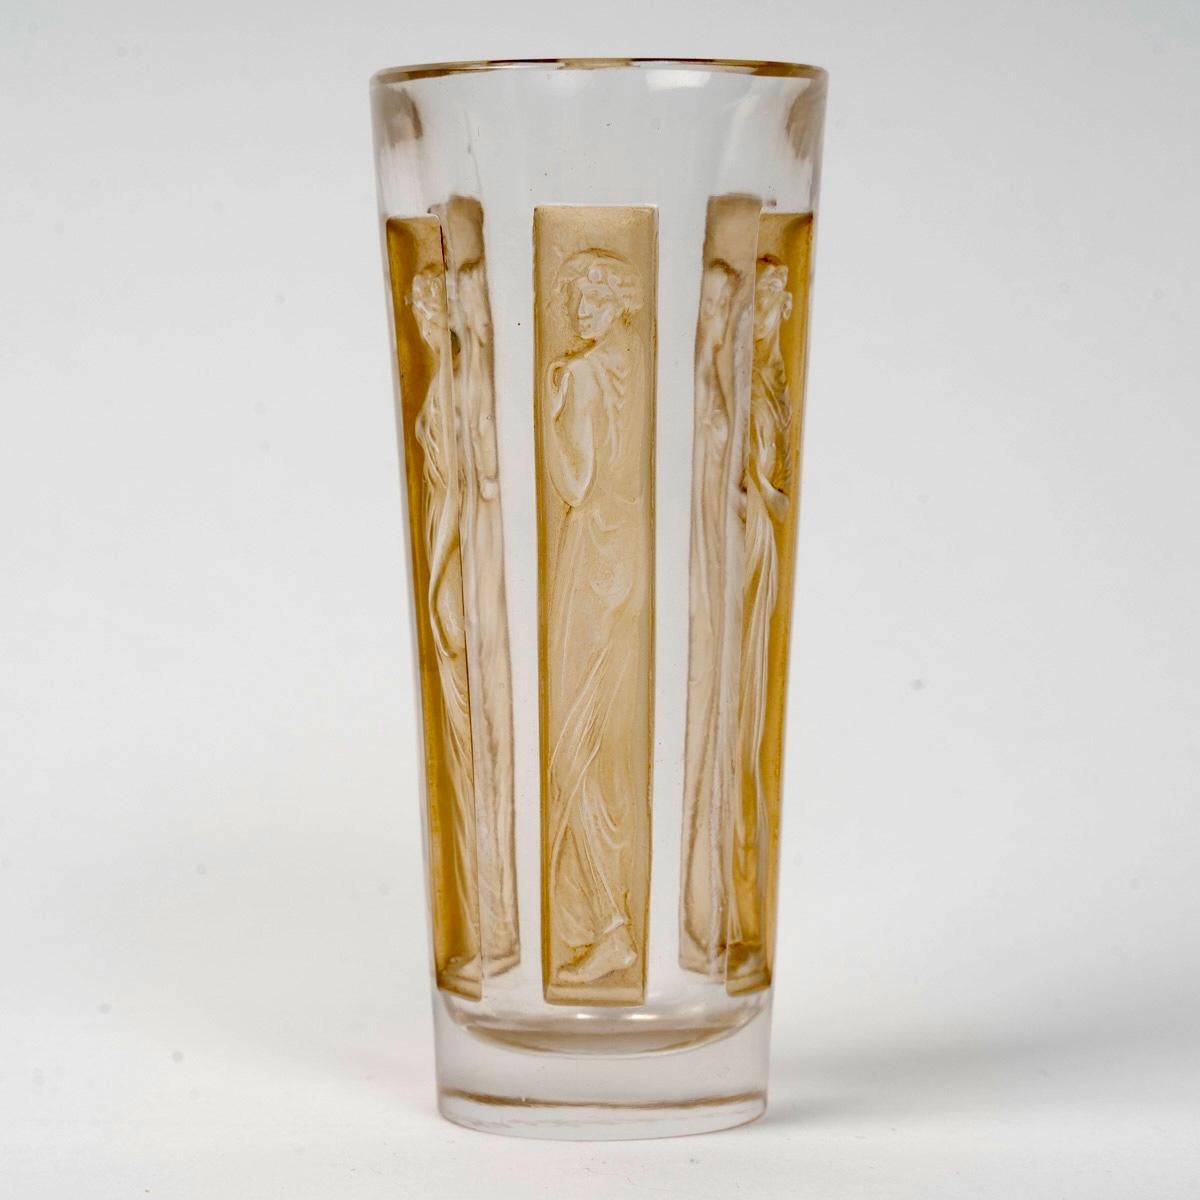 1911 René Lalique Six Figurines Glass Tumbler Glass Sepia Patina In Good Condition For Sale In Boulogne Billancourt, FR